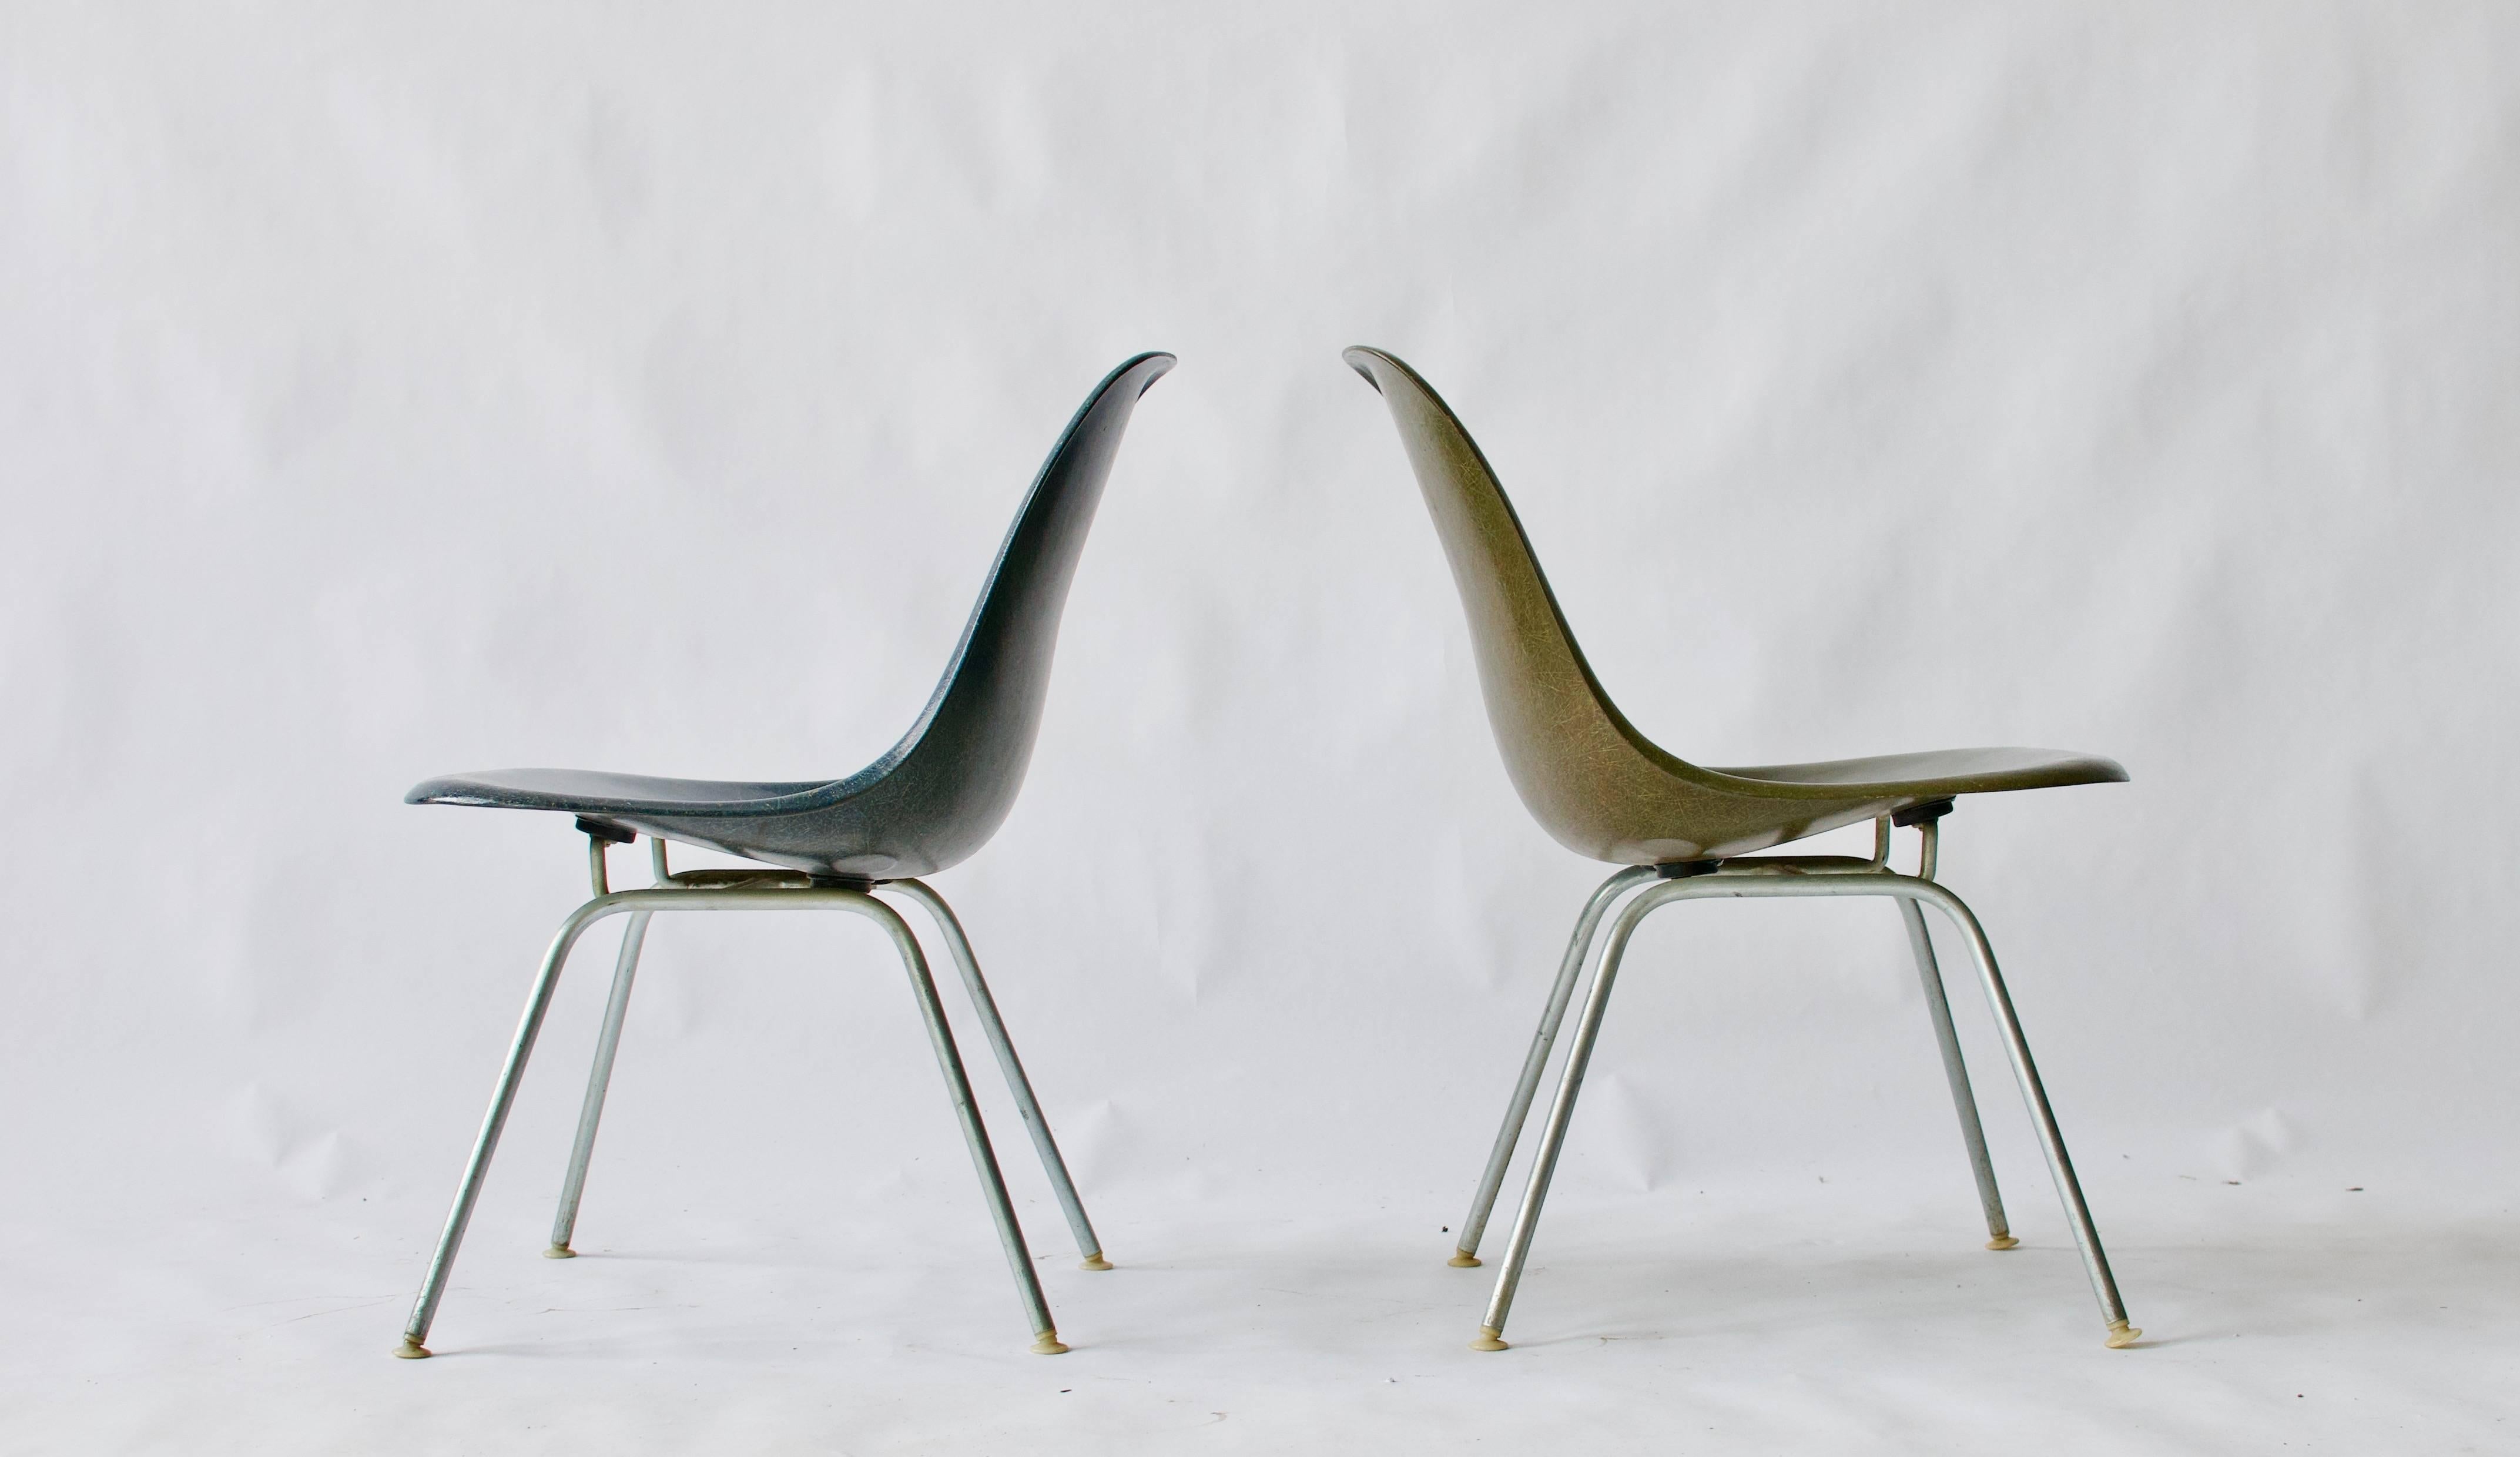 Pair of Charles Eames shell chairs with rare low lounge bases. Colors are green and blue. Herman Miller.

Priced as a pair but would sell individually.